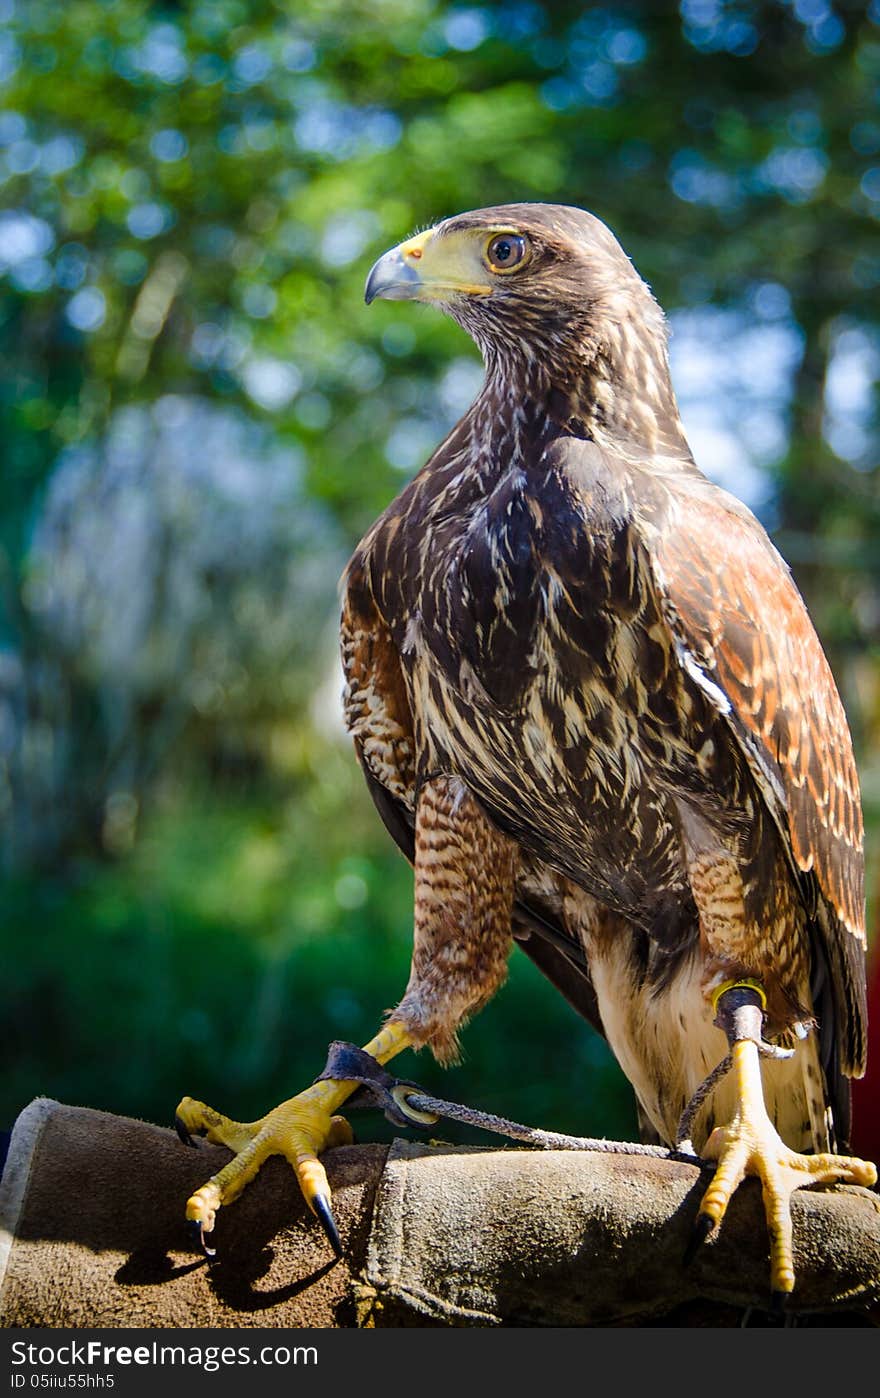 Stately portrait of a captive falcon held in a gloved hand in a wildlife sanctuary.